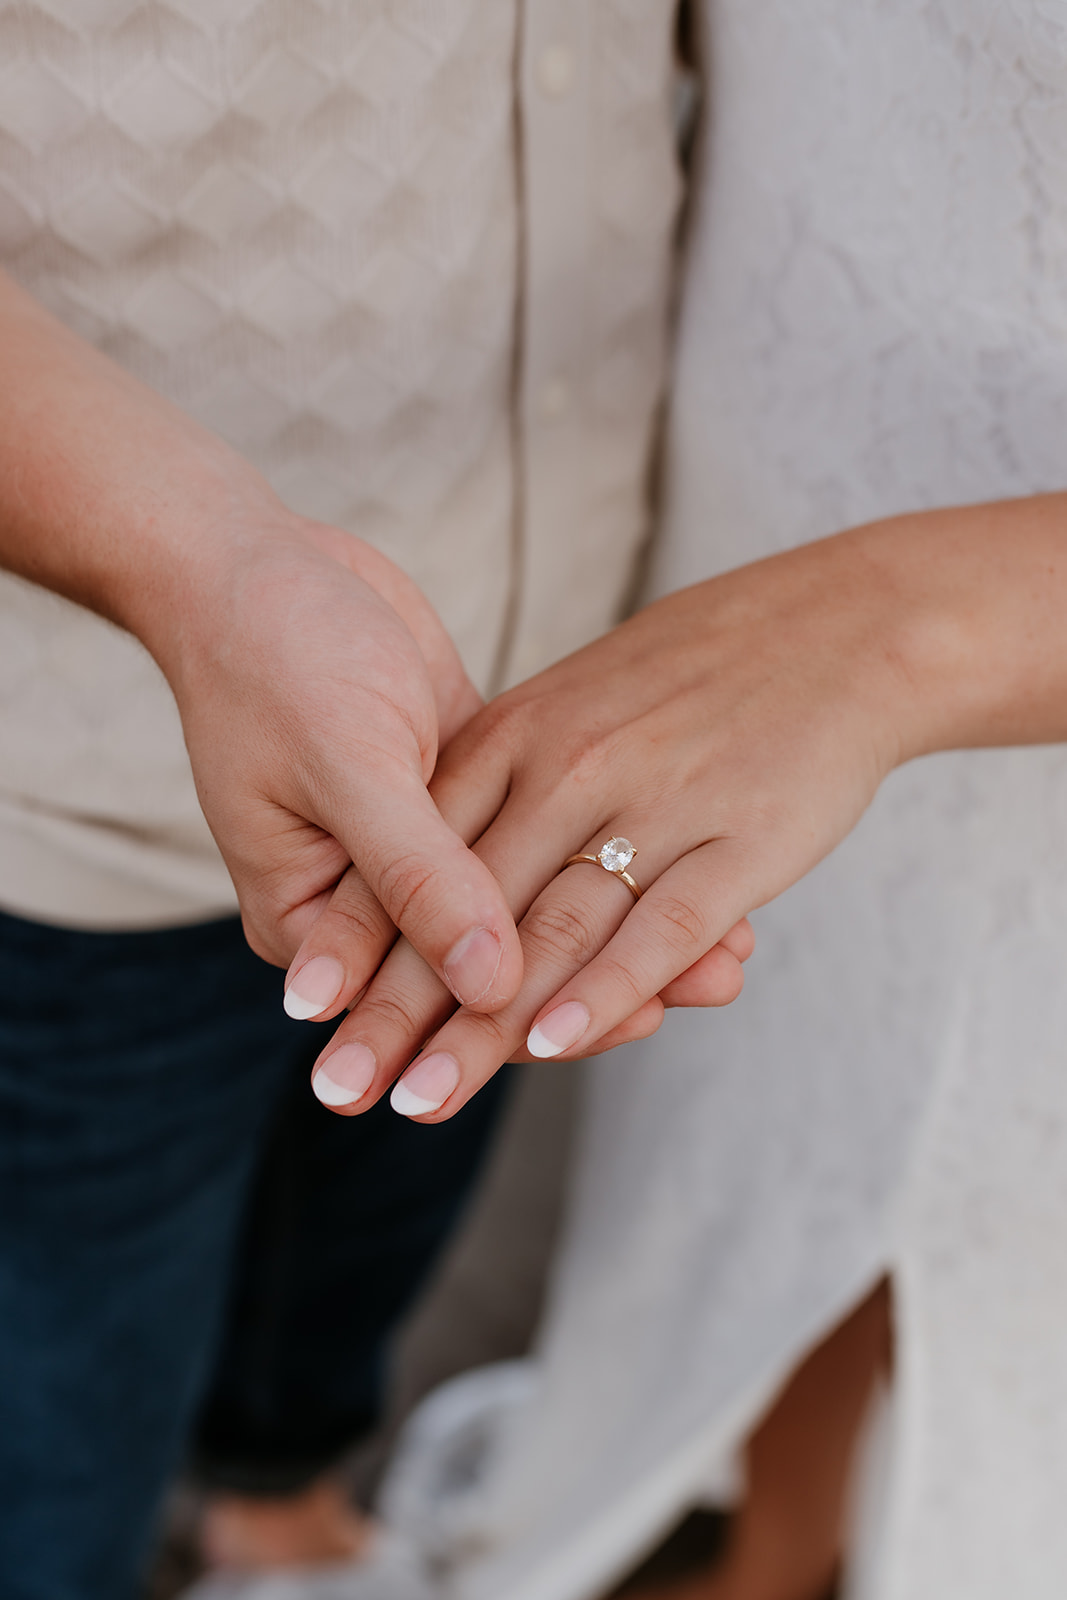 Close-up of a couple holding hands, showcasing an engagement ring on a woman's finger.